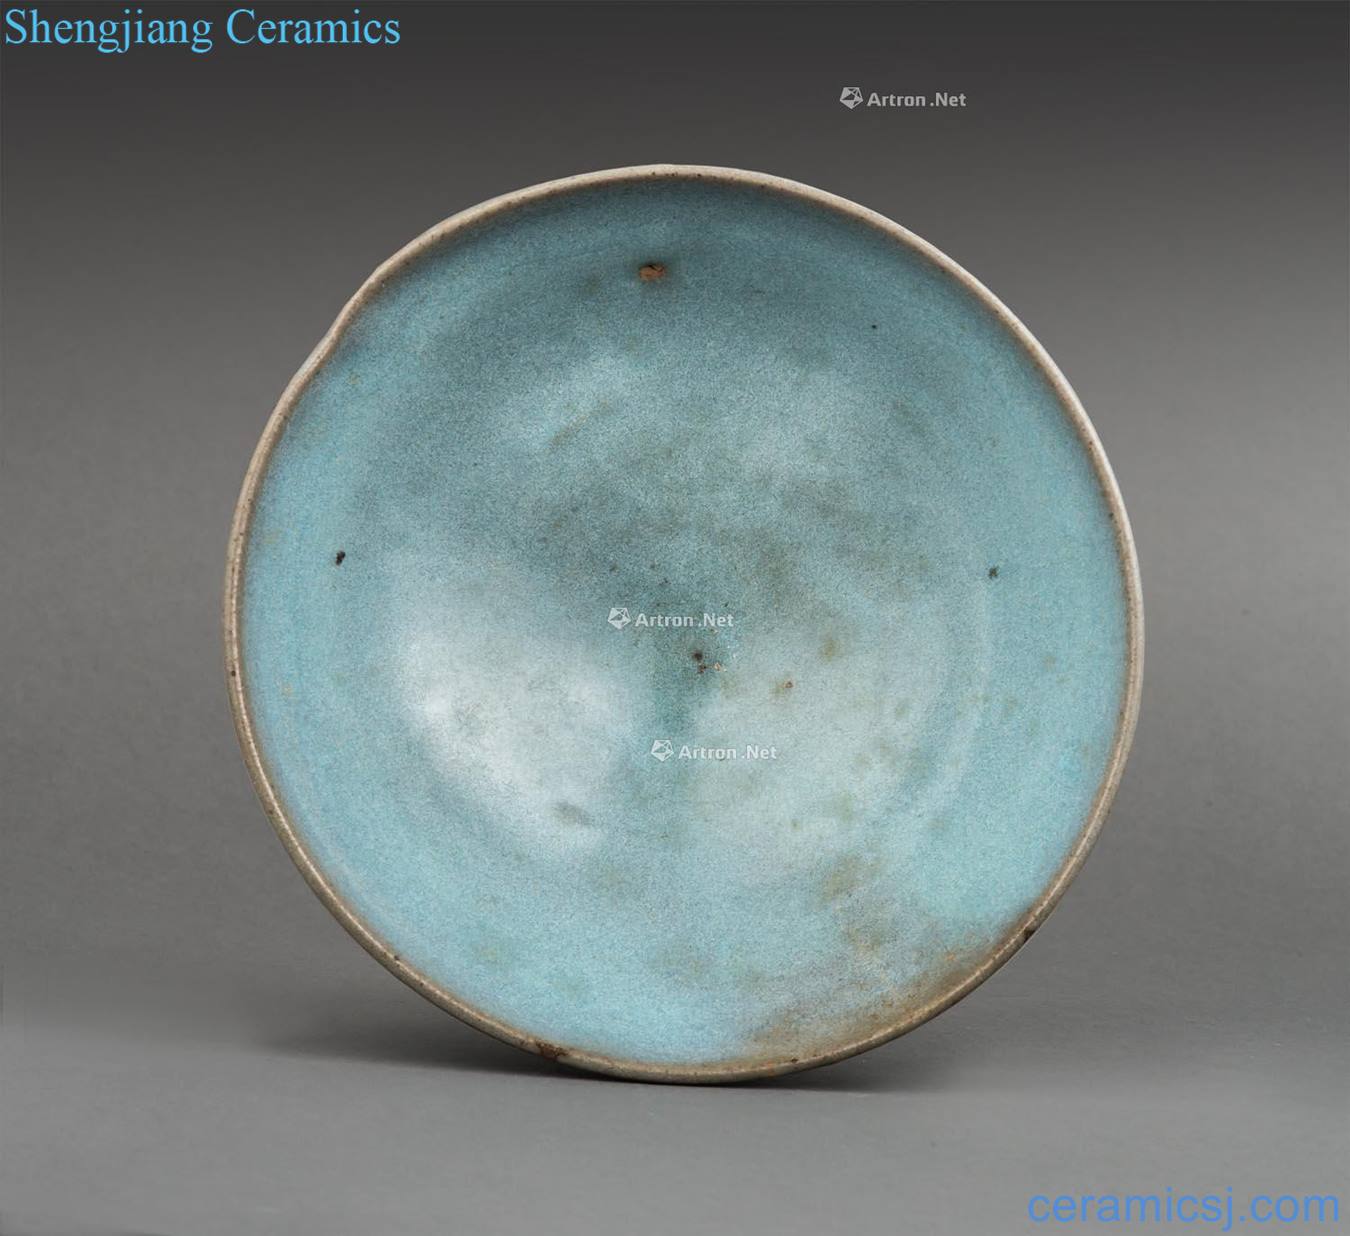 The yuan dynasty (1271-1368) bowl of masterpieces